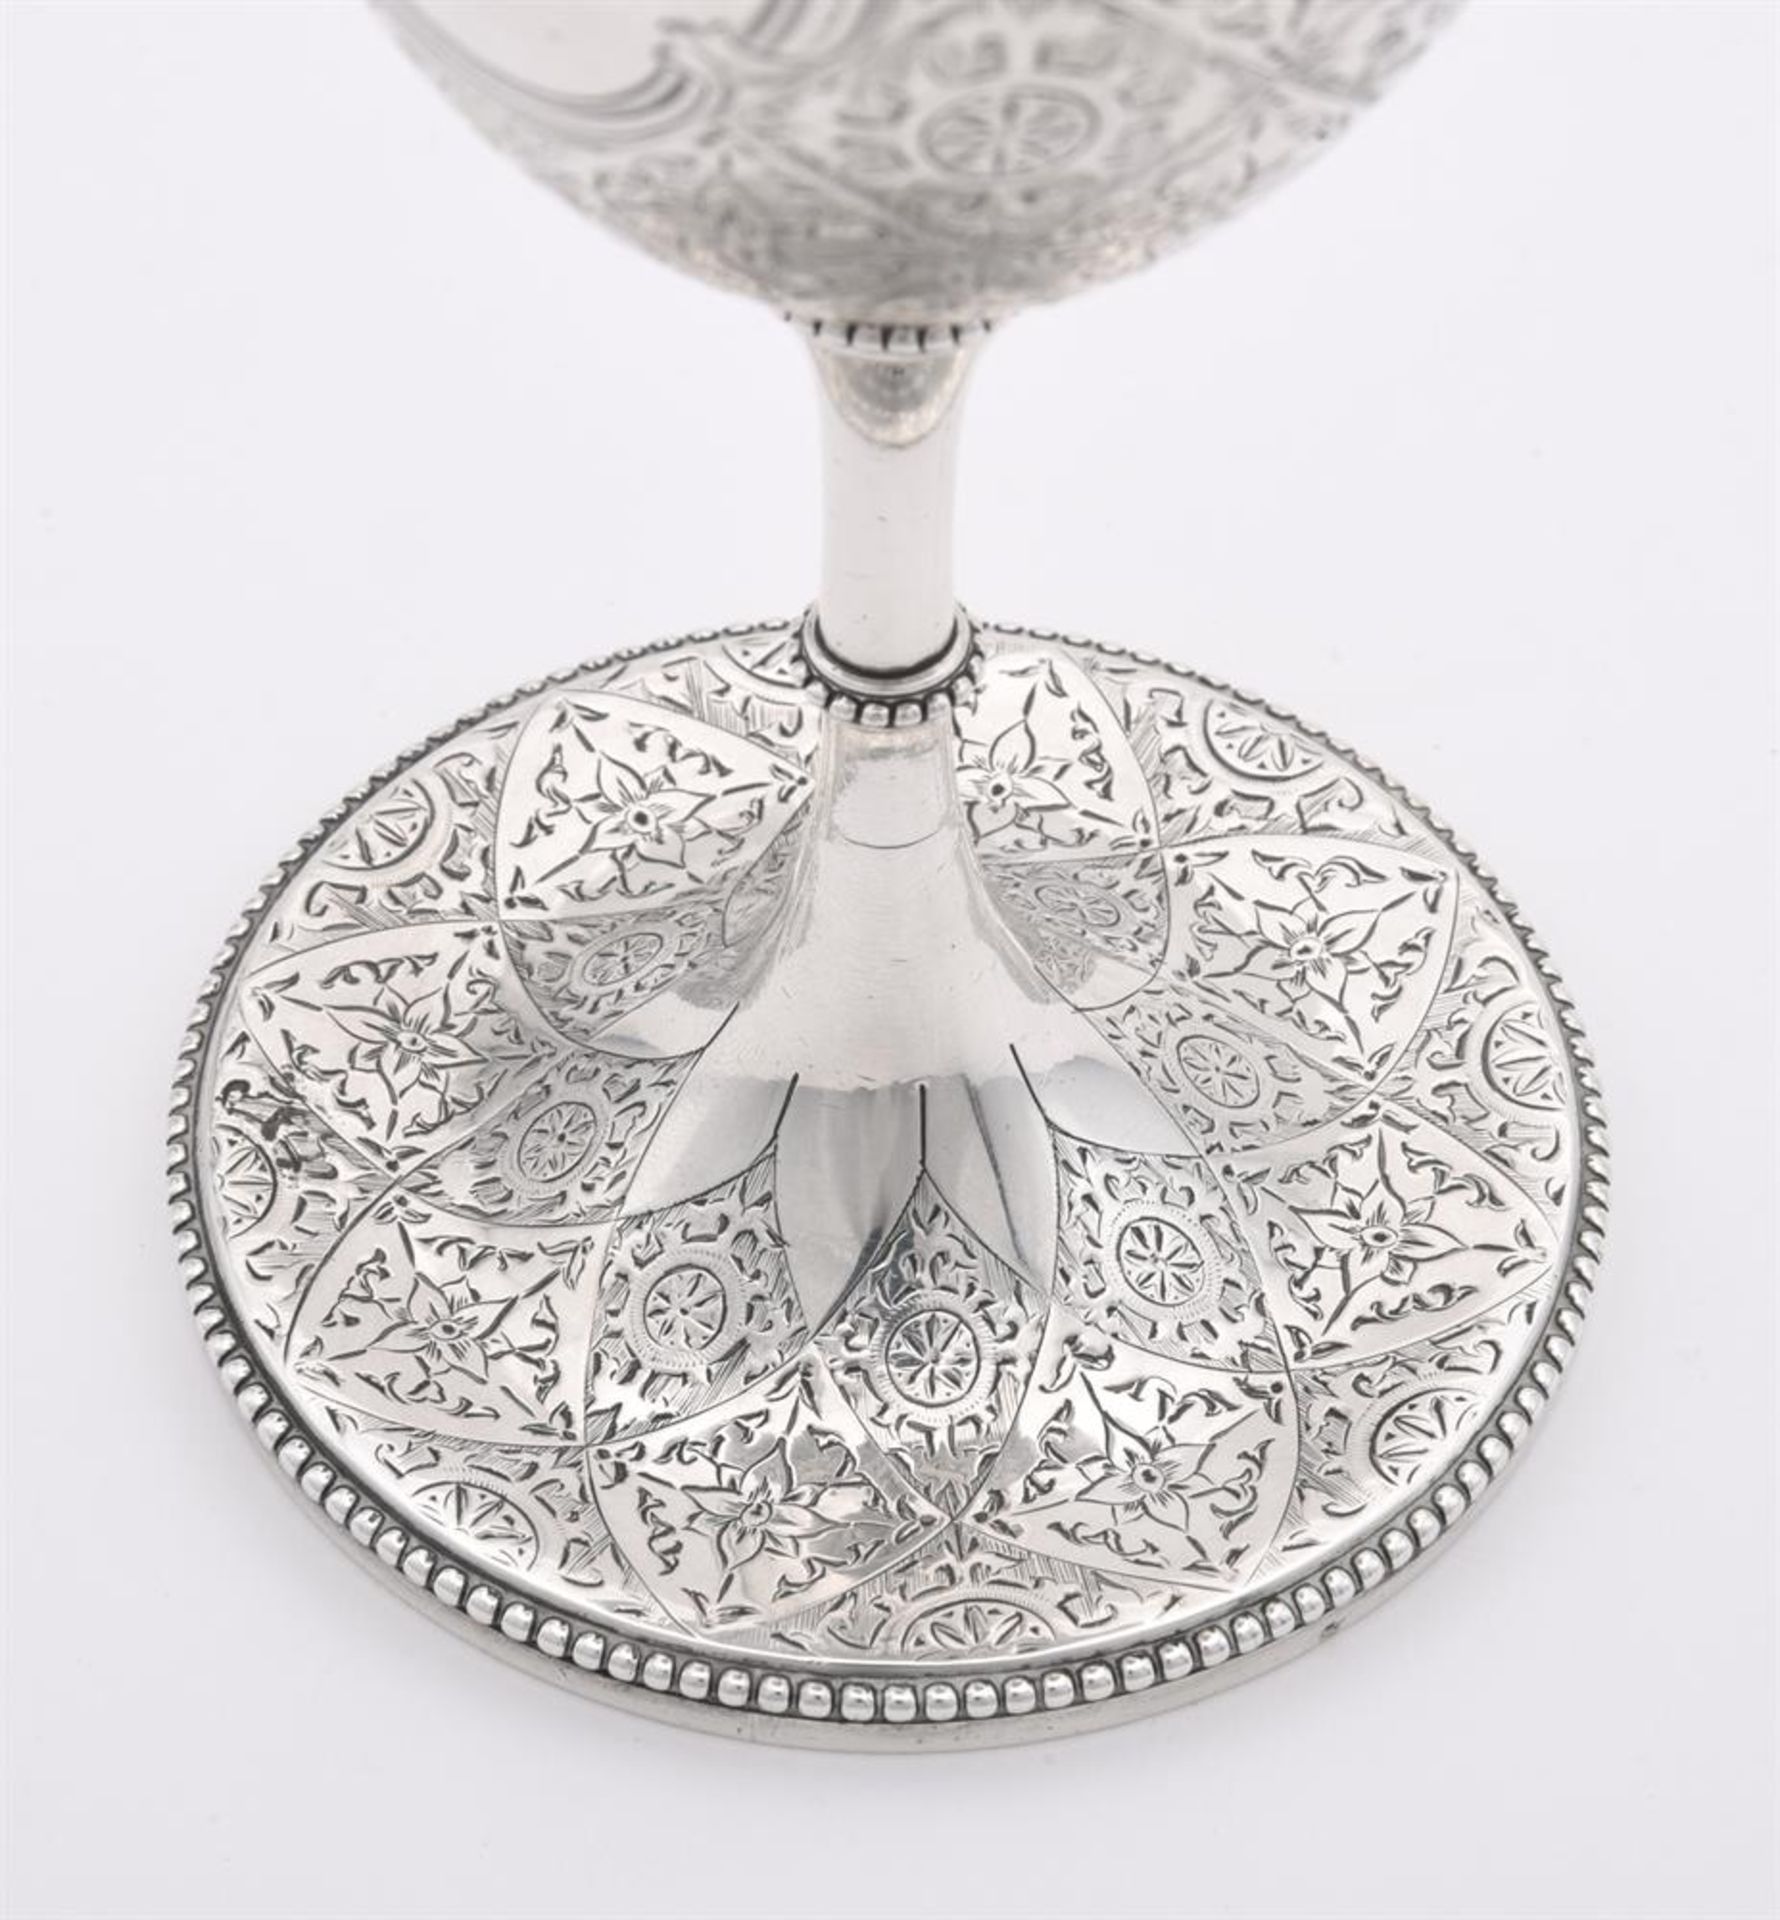 A VICTORIAN SILVER GOBLET, ROBERT HENNELL III - Image 3 of 3